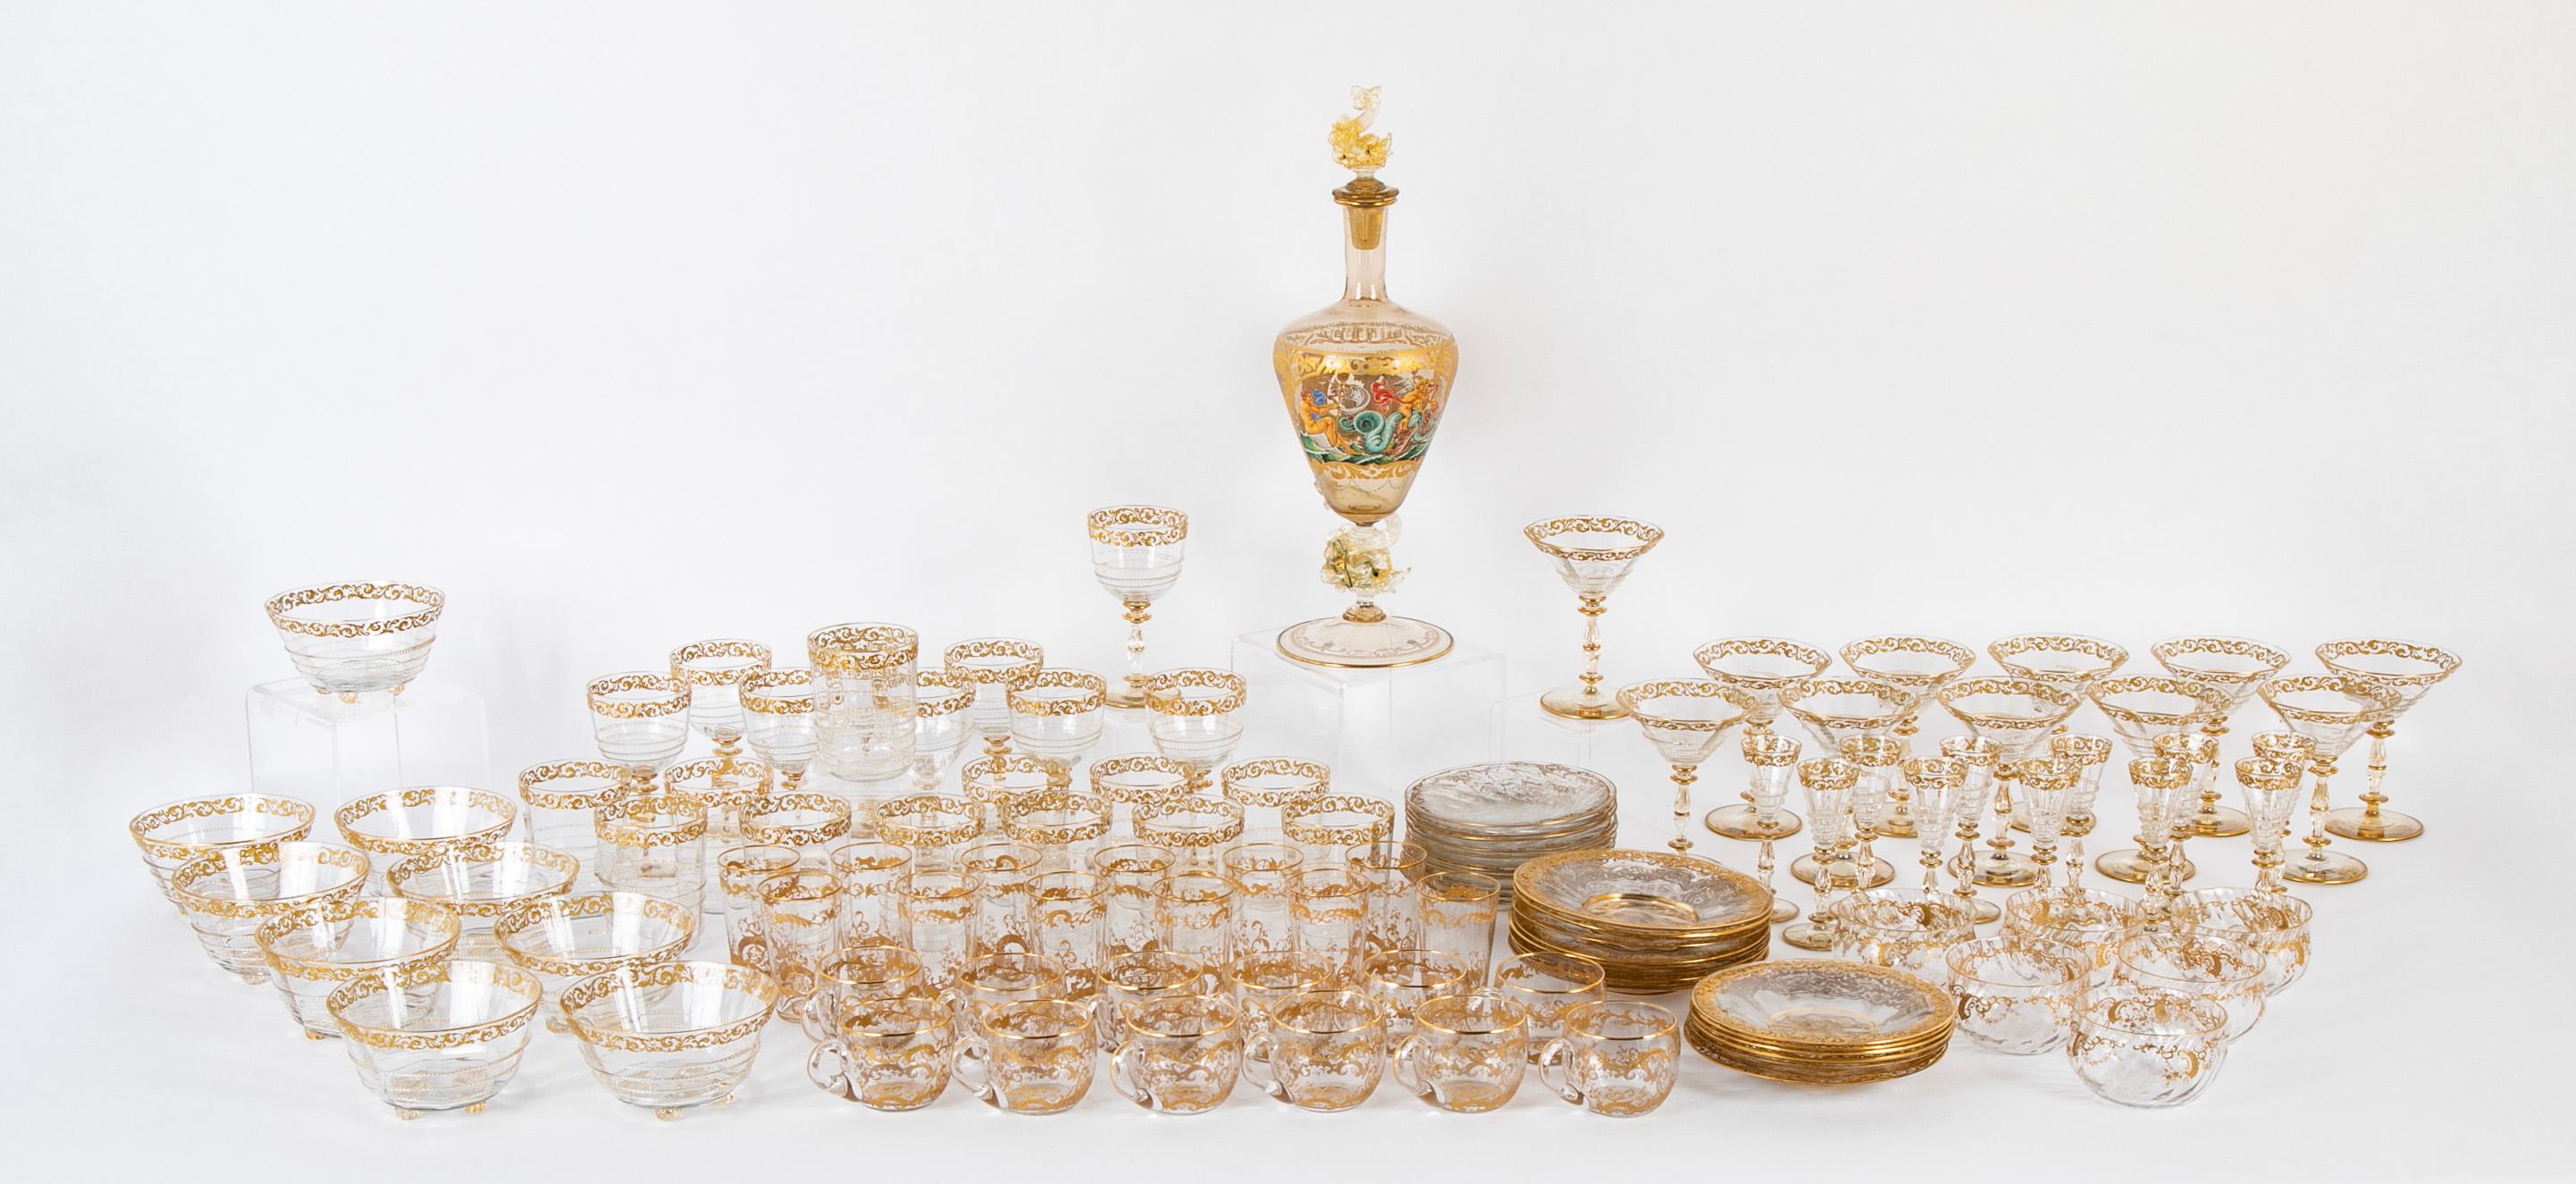 19th Century A Magnificent Collection of Late 19th/Early 20th Century Venetian Glassware For Sale